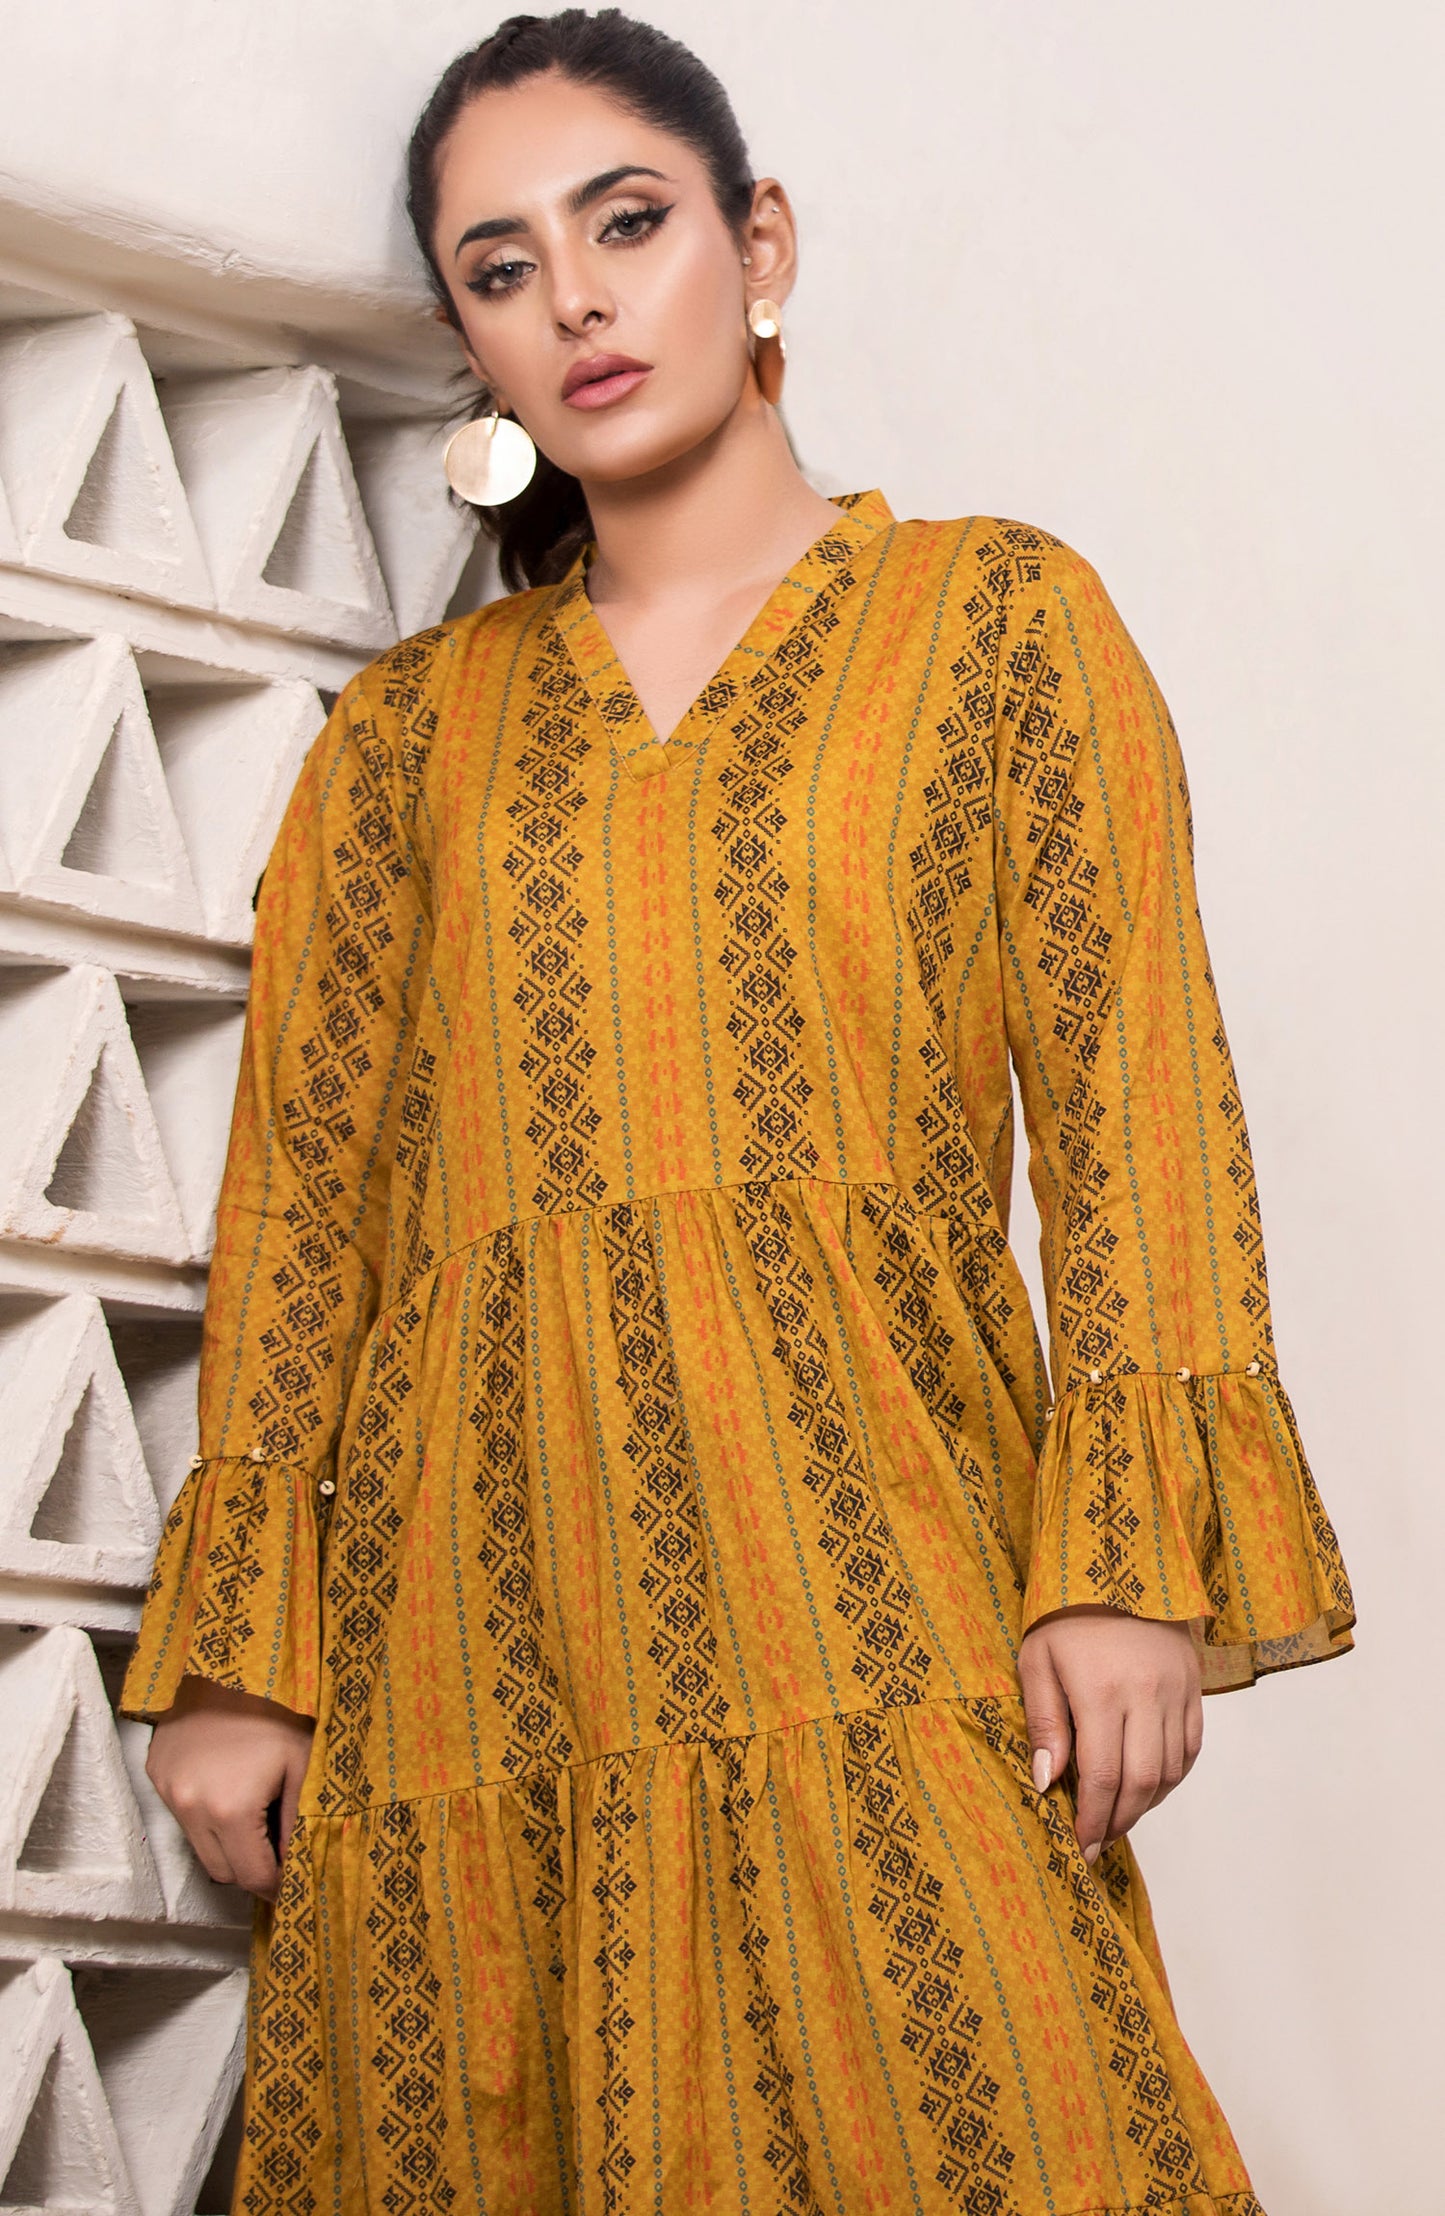 HCS-S-22-059/S MUSTARD LAWN SCSHIRT READY TO WEAR SHIRT